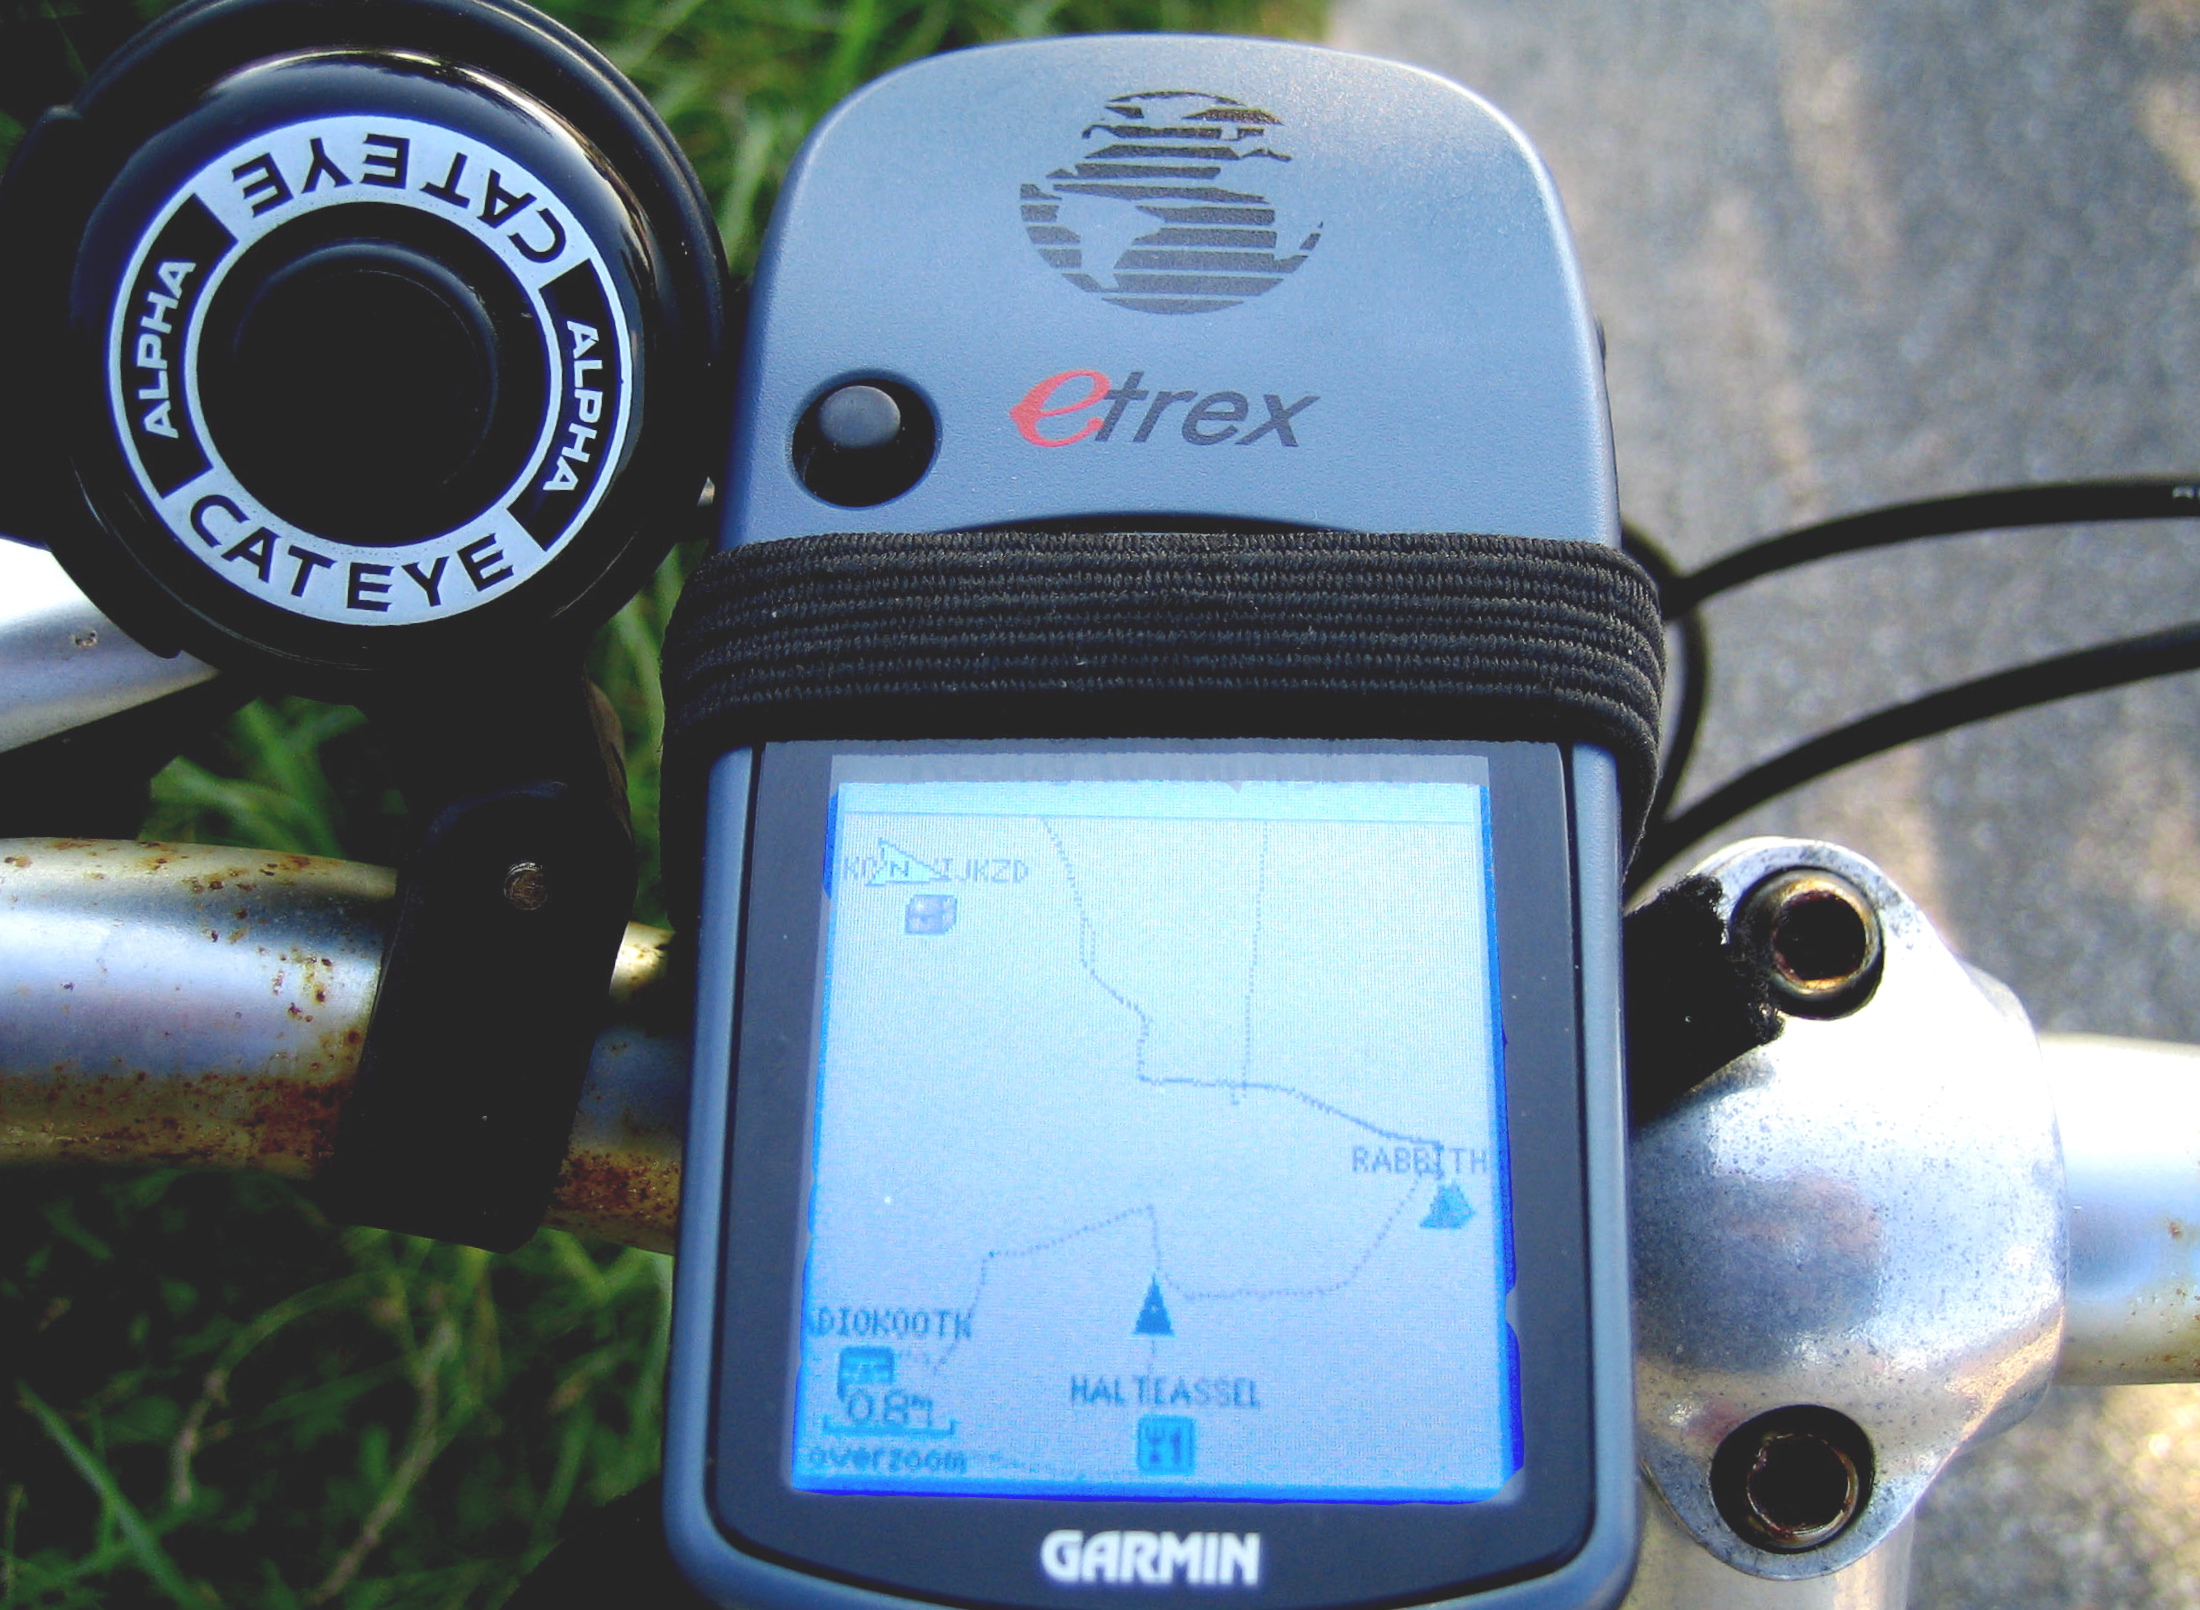 a close up of a bike with a gps